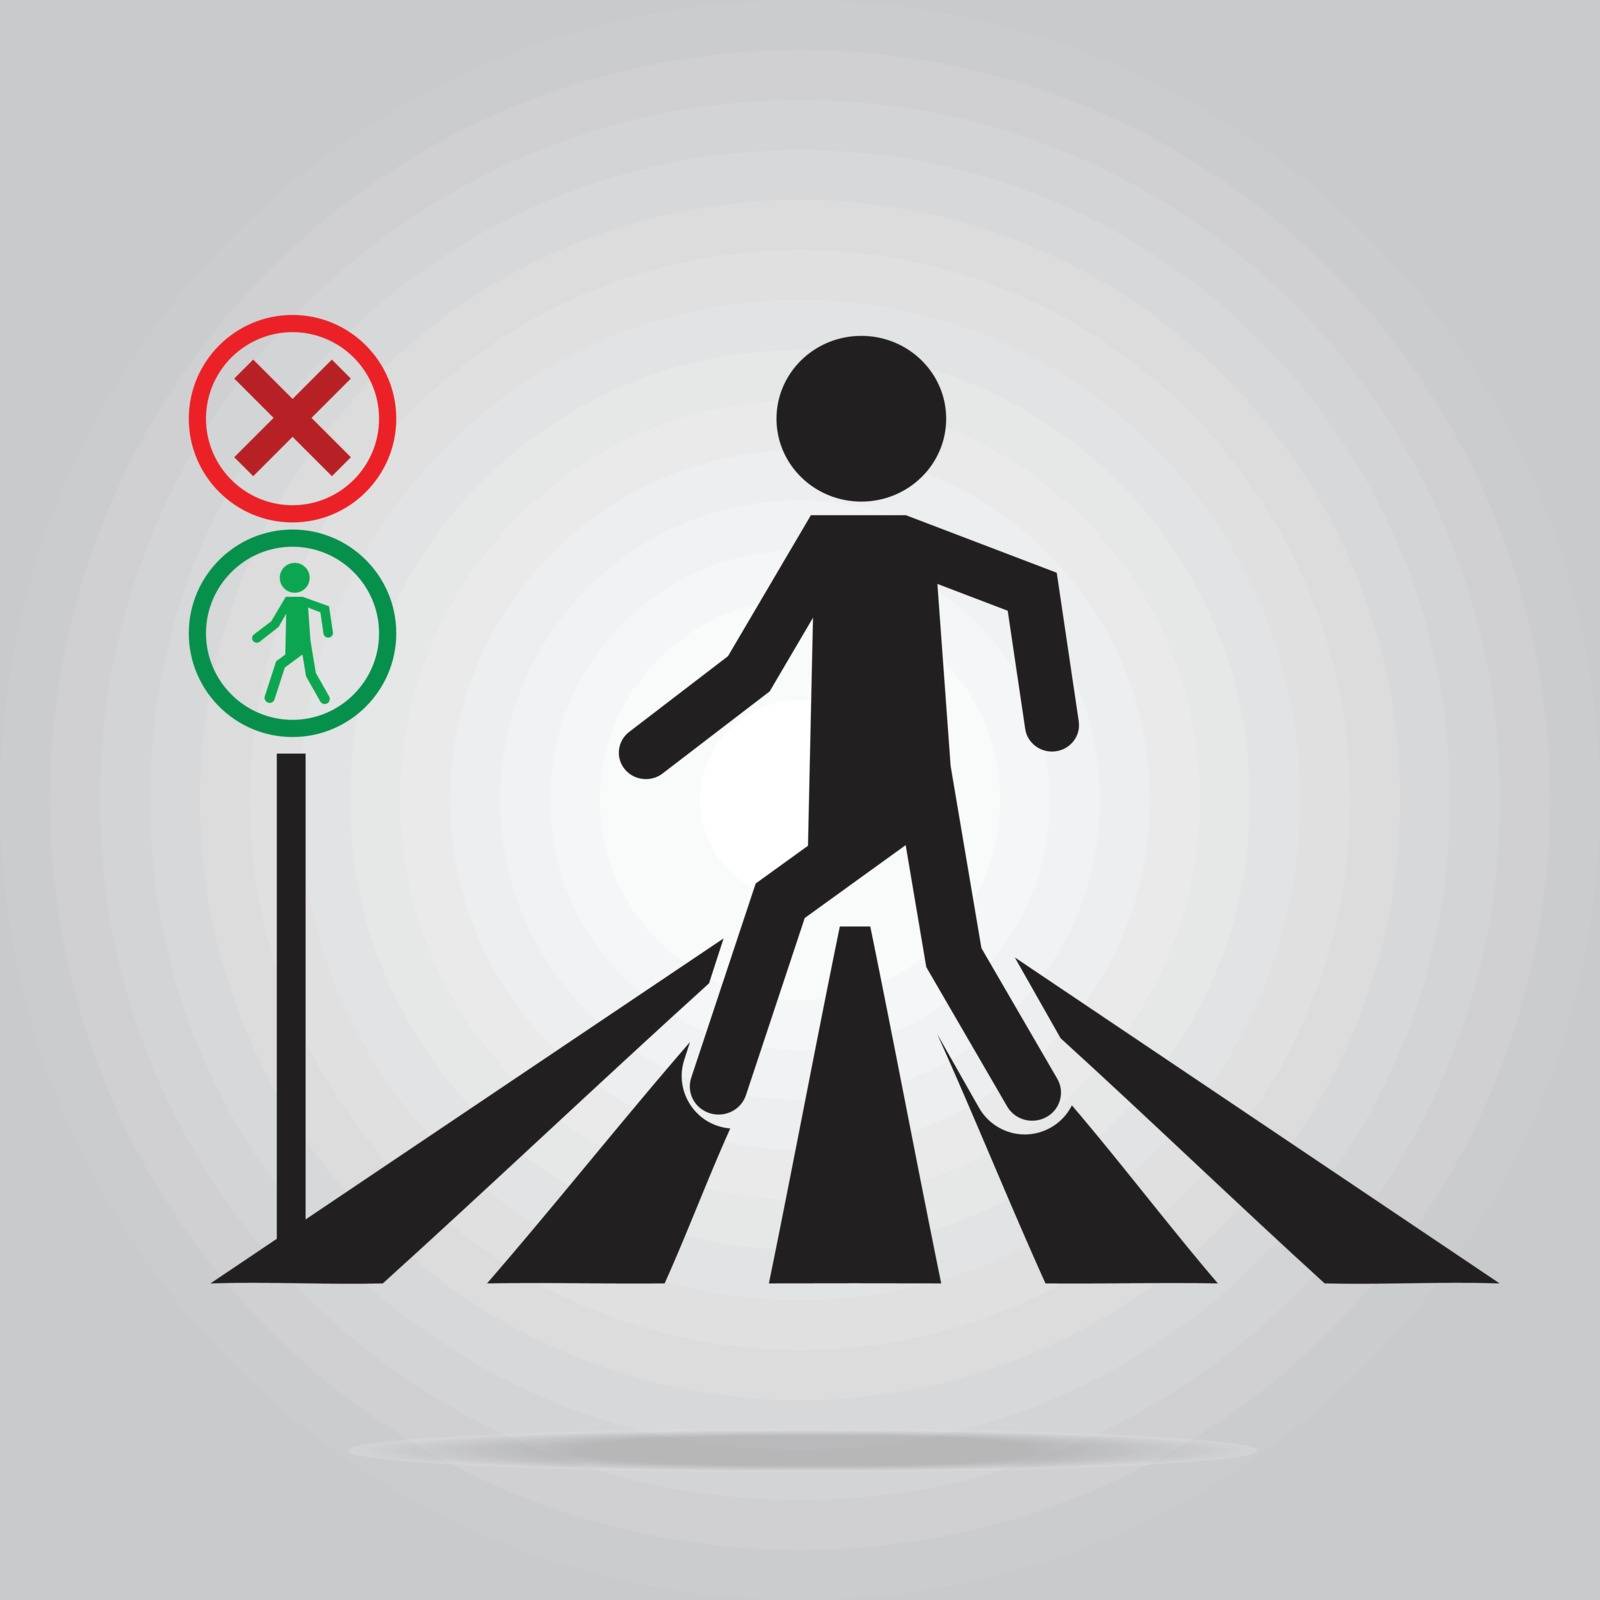 pedestrian crossing sign, school road sign illustration by Kheat